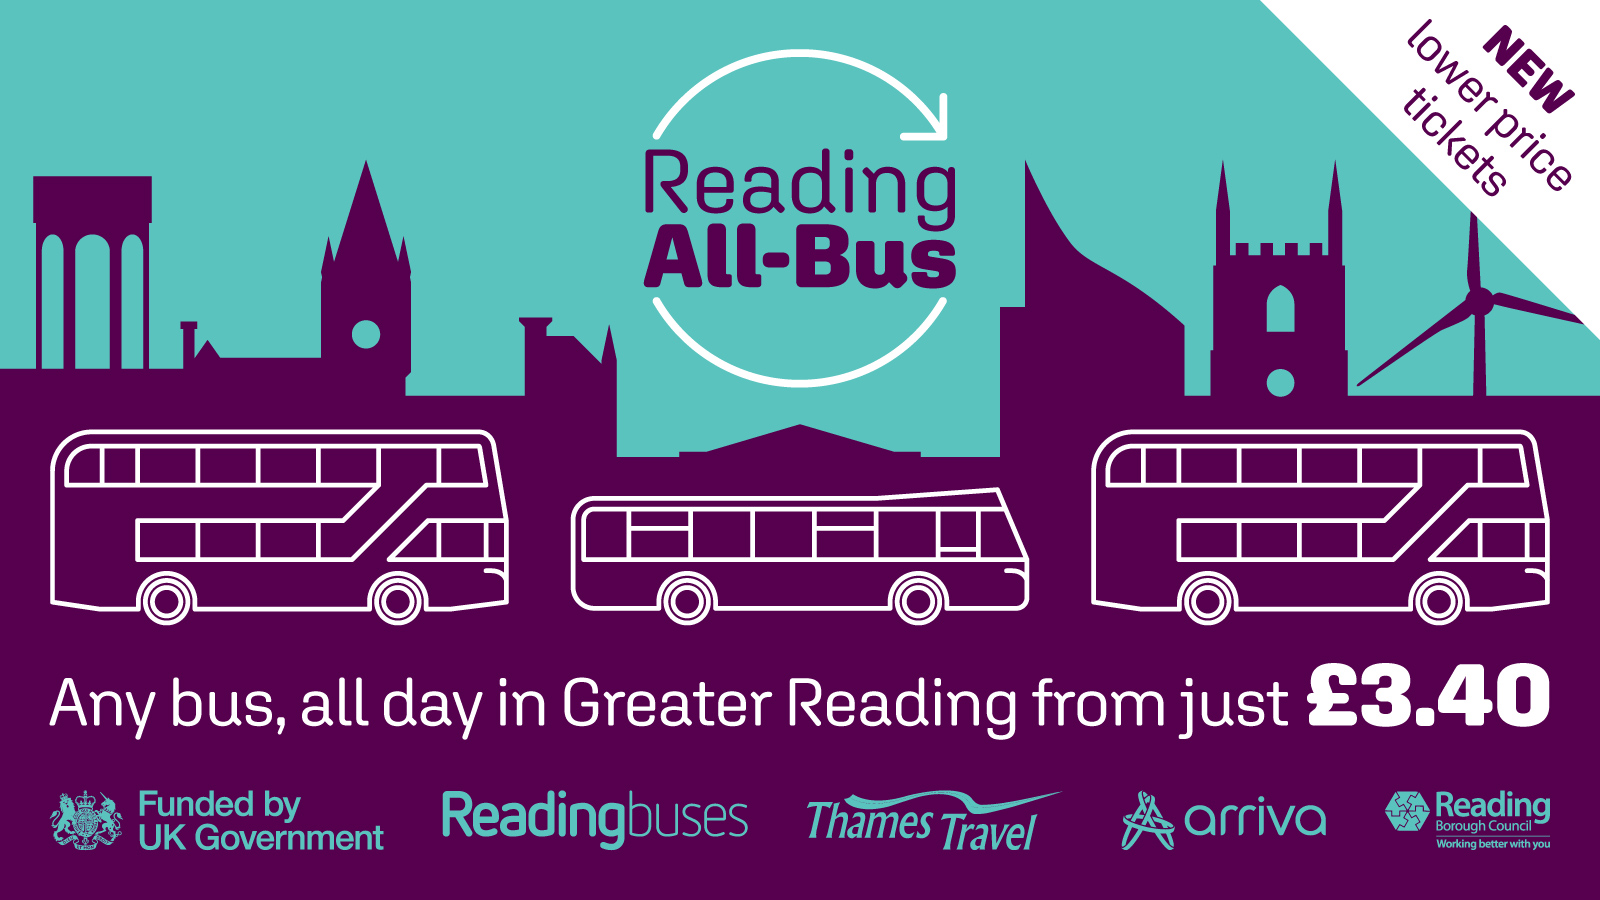 An infographic detailing the Reading all bus value day ticket from just three pounds and 40 pence.